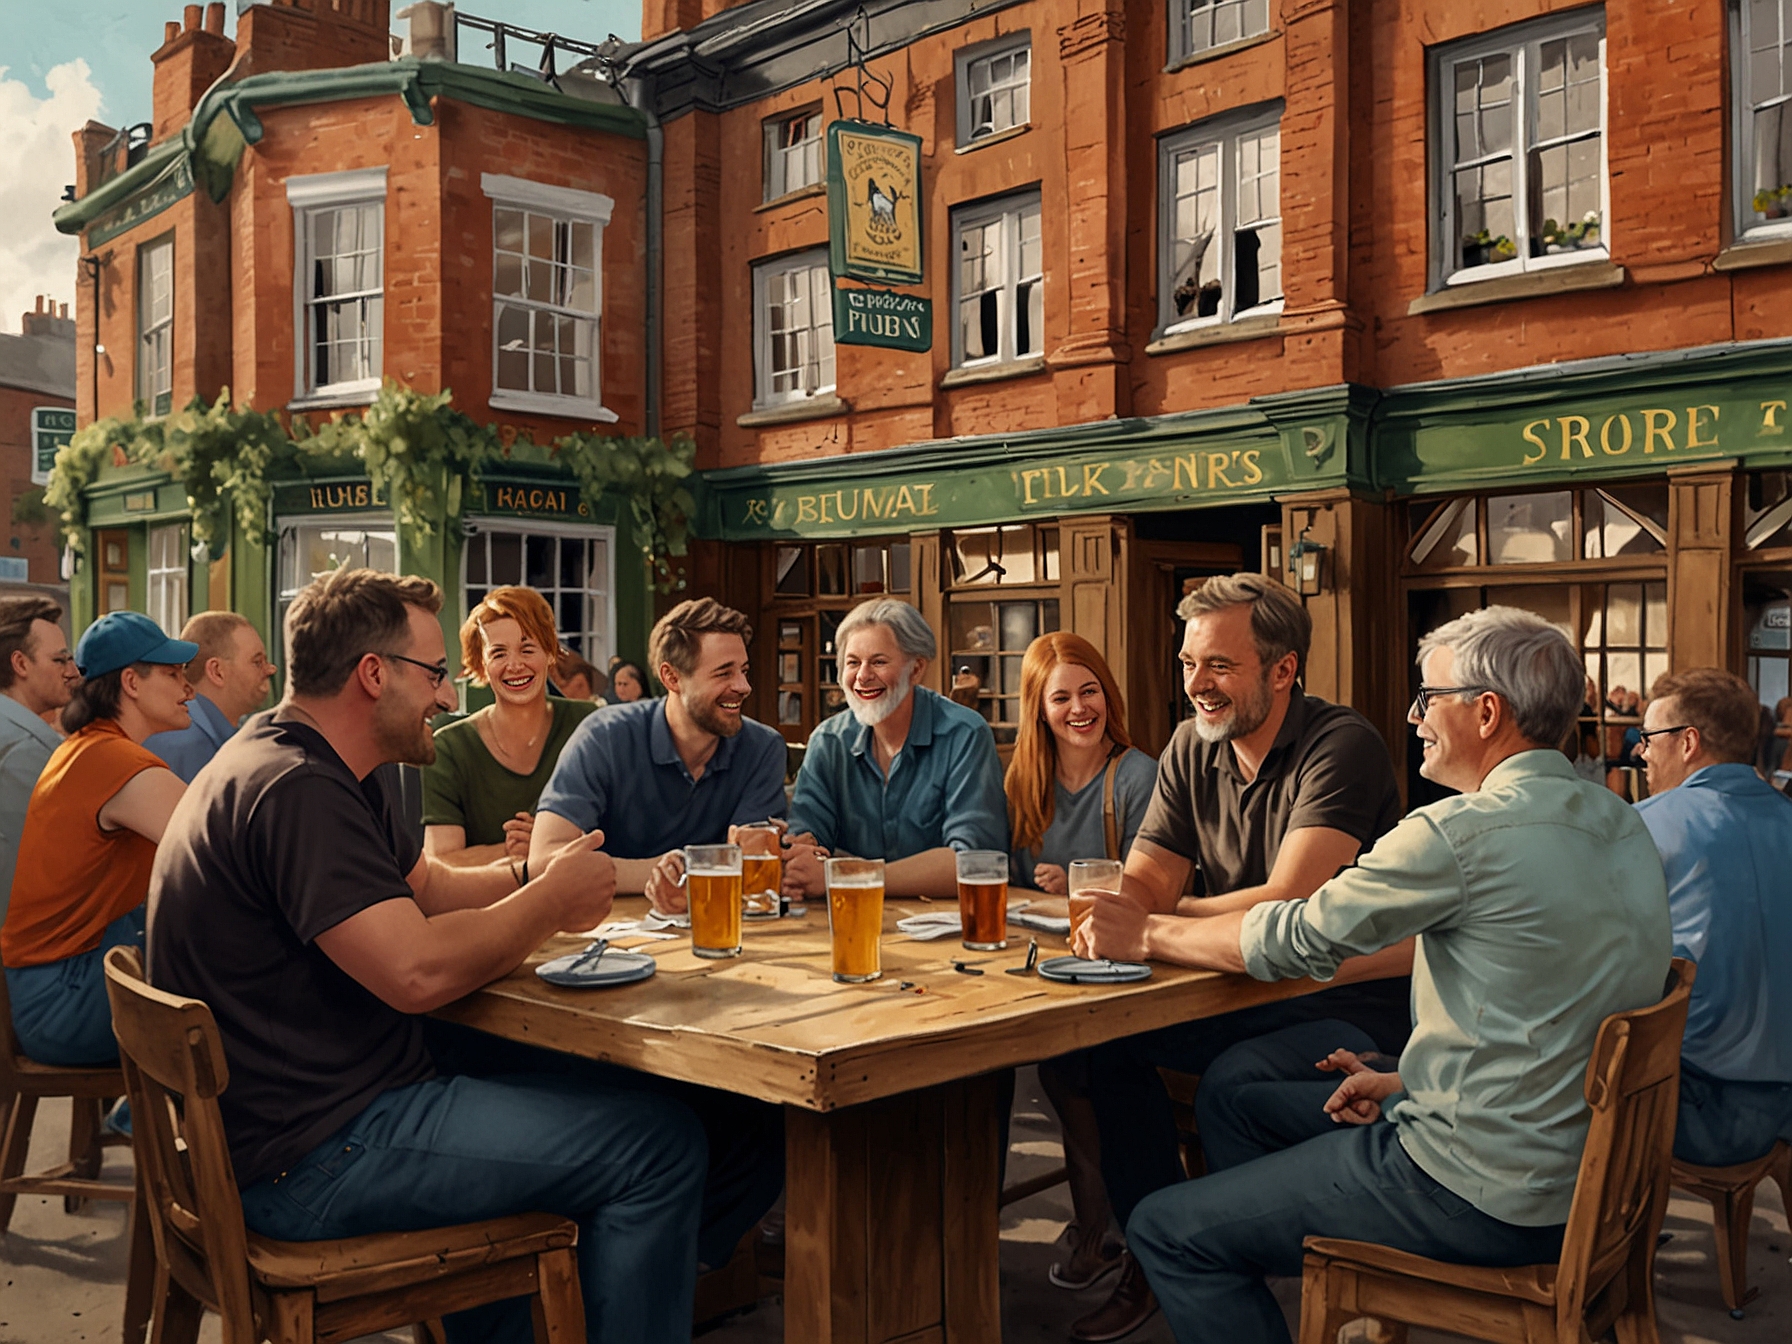 A vibrant community pub event, showcasing how local residents are coming together to save their pubs by hosting events and supporting community ownership initiatives.